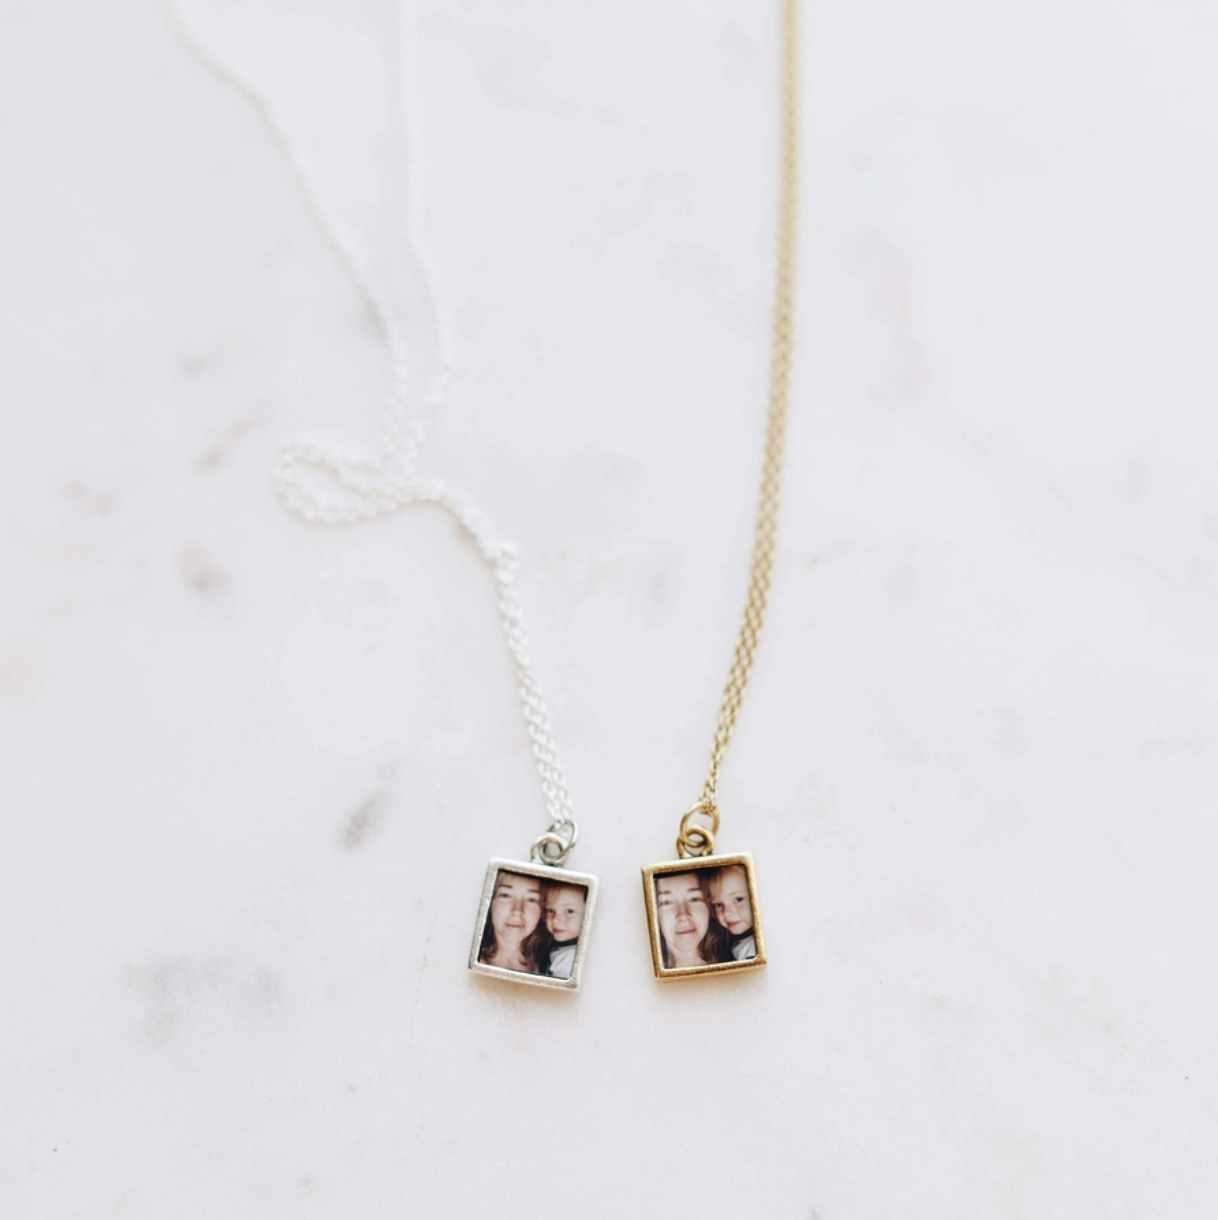 small square locket pendant in gold and silver holding a tiny photograph that they put inside for you